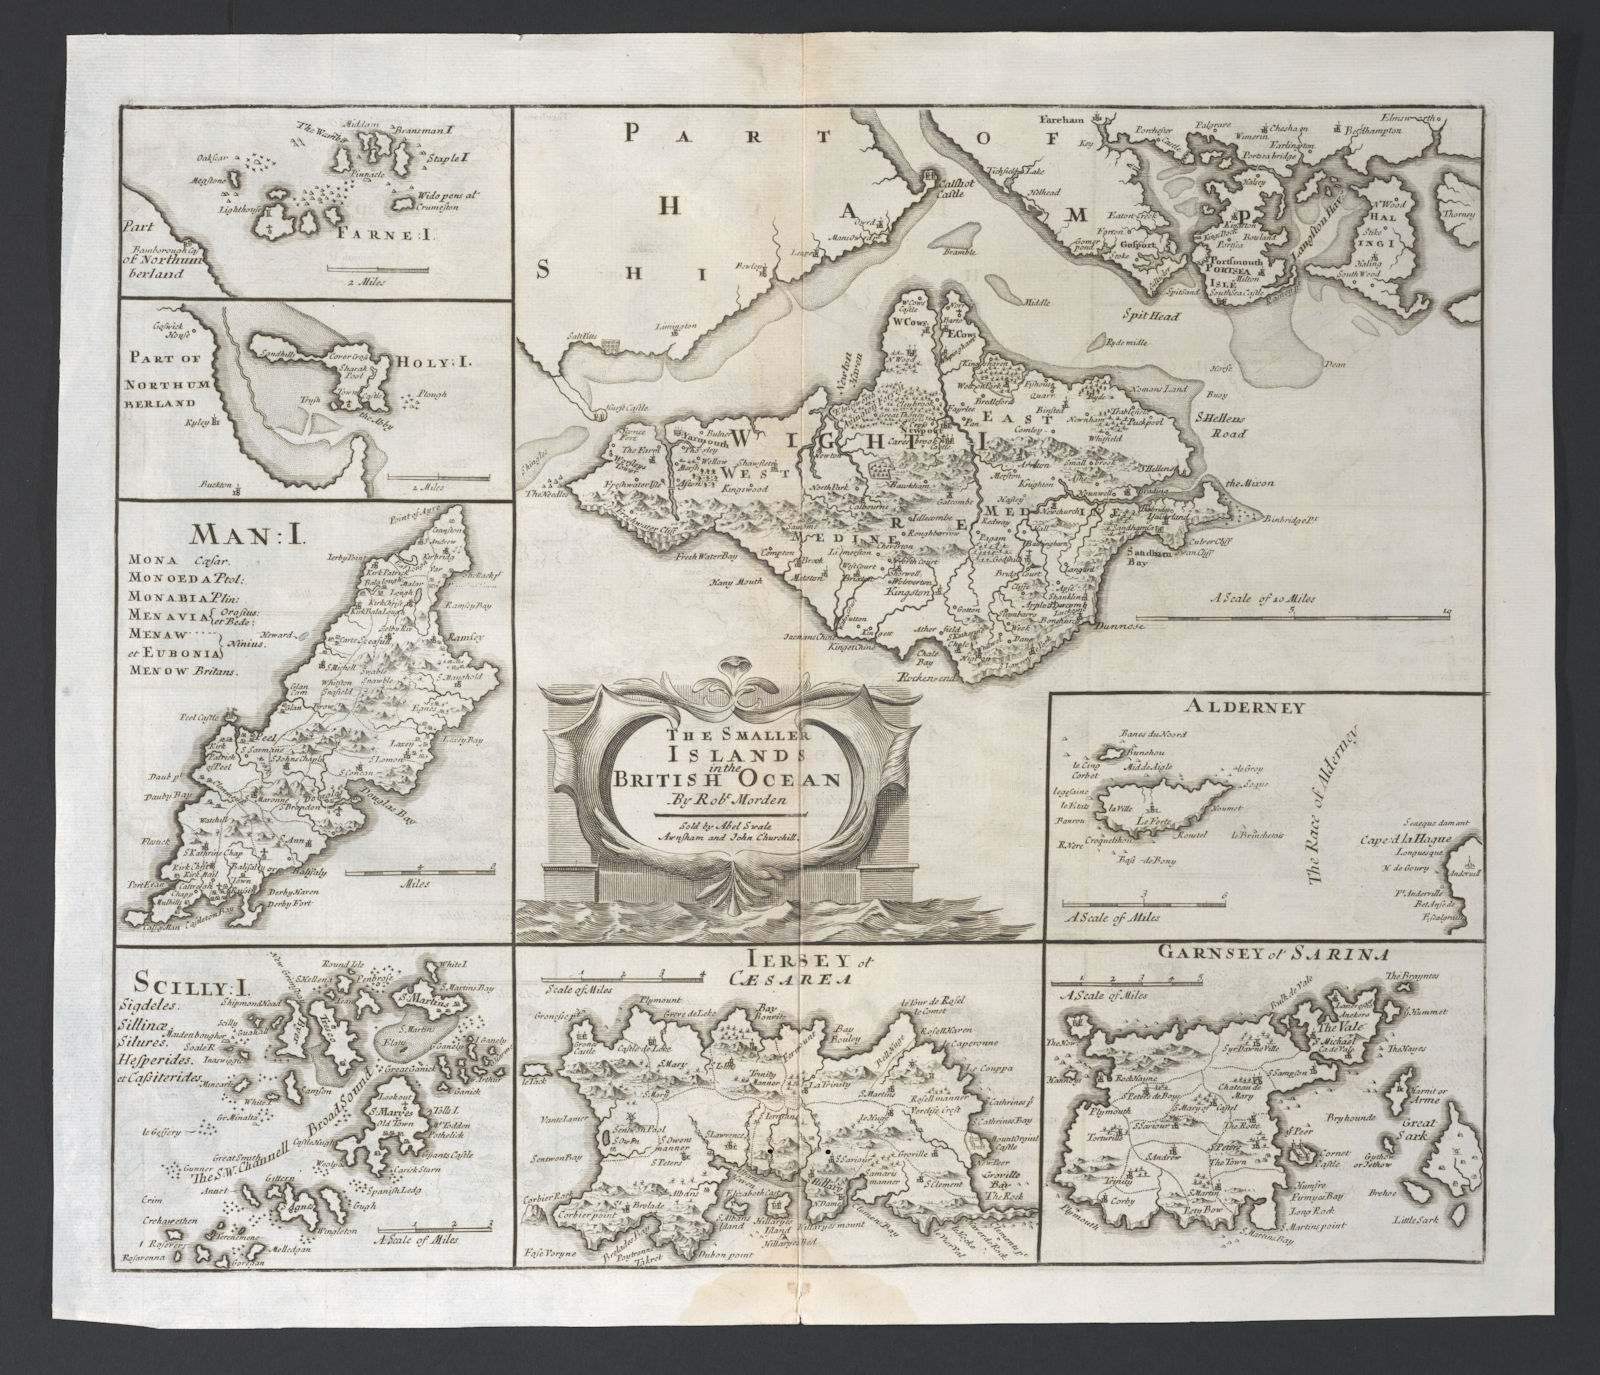 ENGLAND. Isles of Wight/Man Scilly Isles Farne/Channel Islands. MORDEN 1753 map